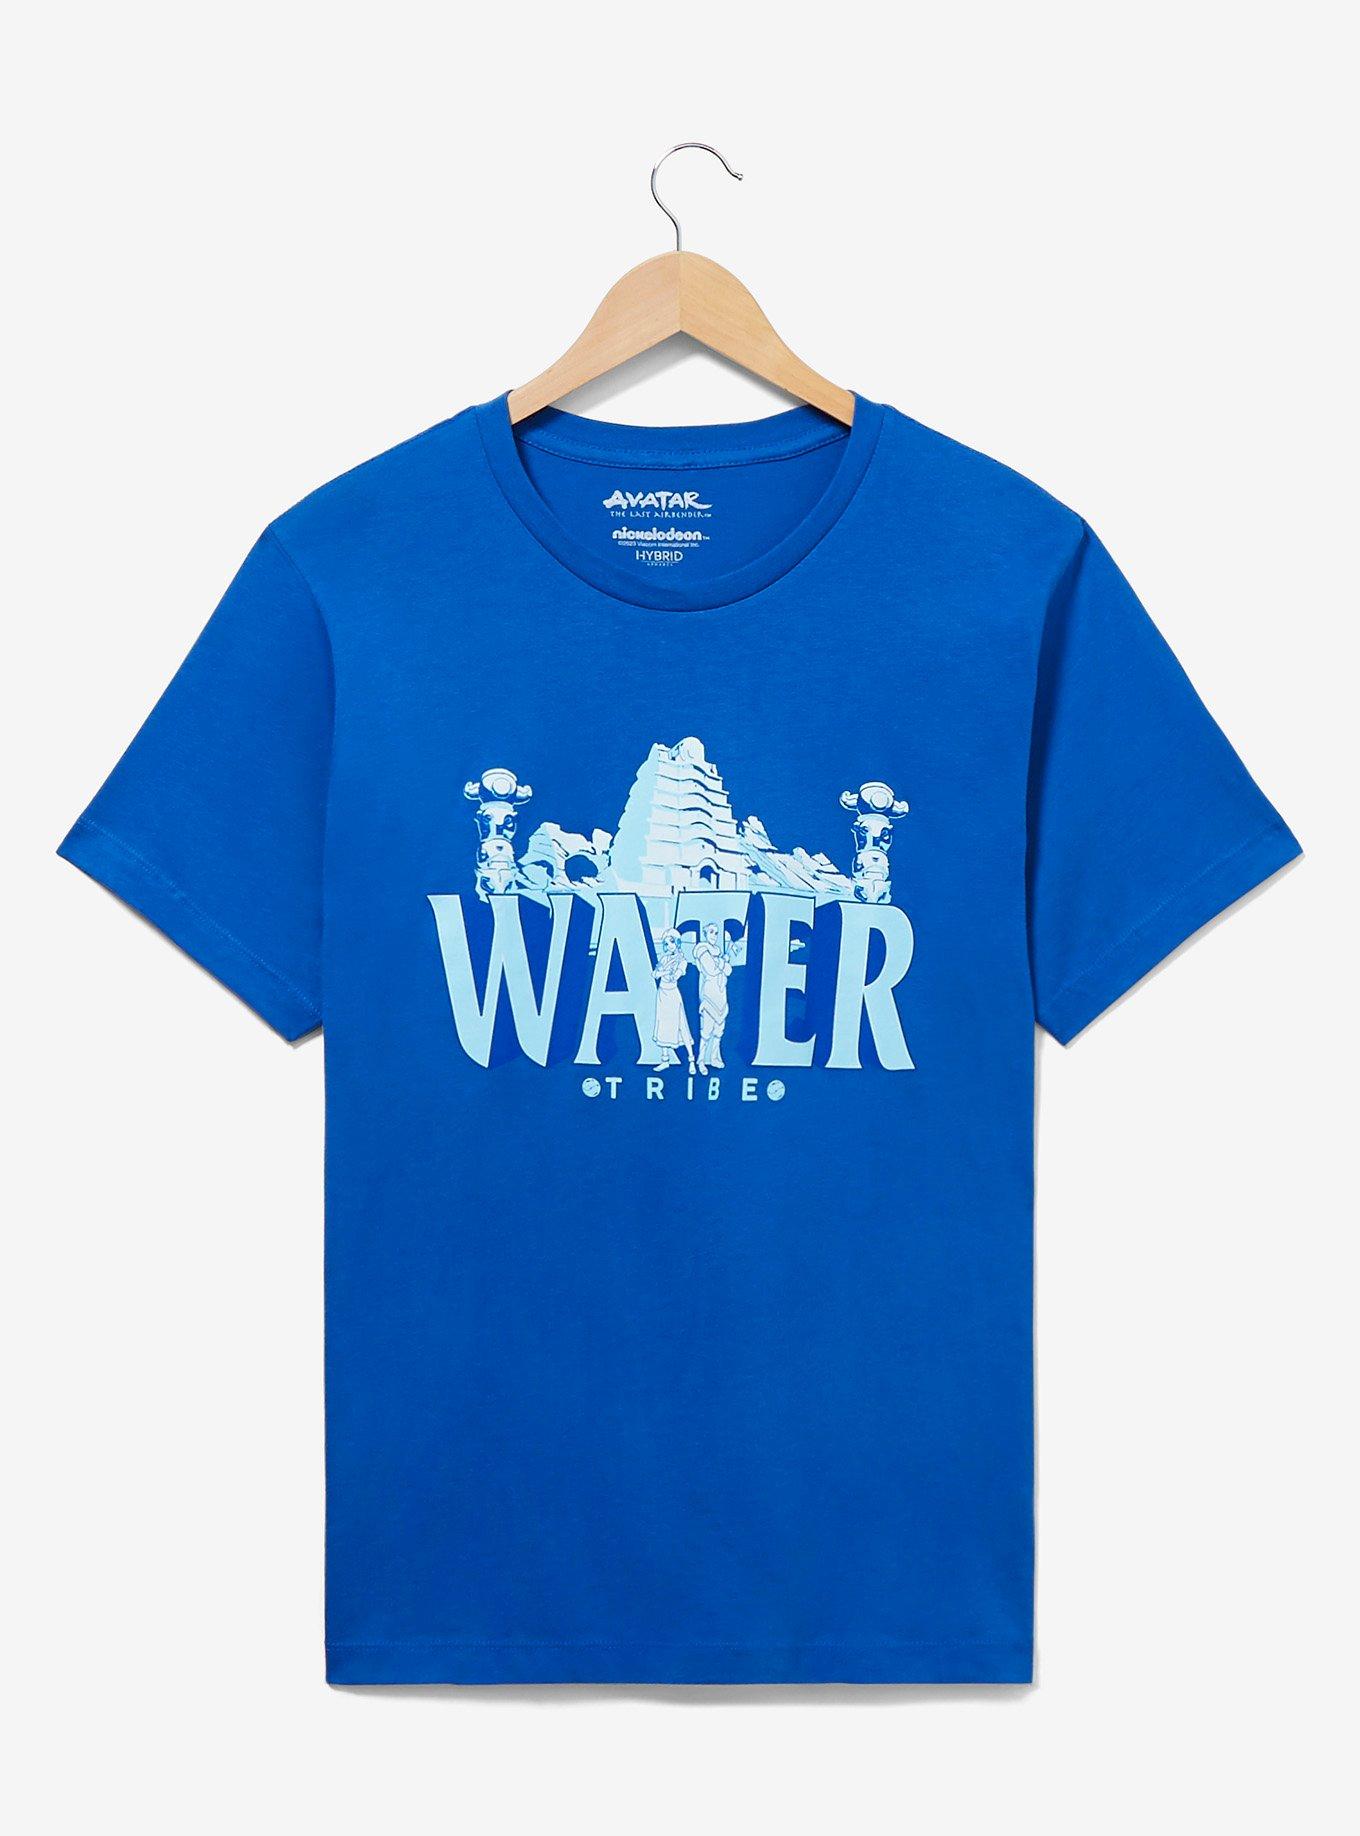 Avatar: The Last Airbender Tonal Water Tribe T-Shirt - BoxLunch Exclusive, LIGHT BLUE, hi-res